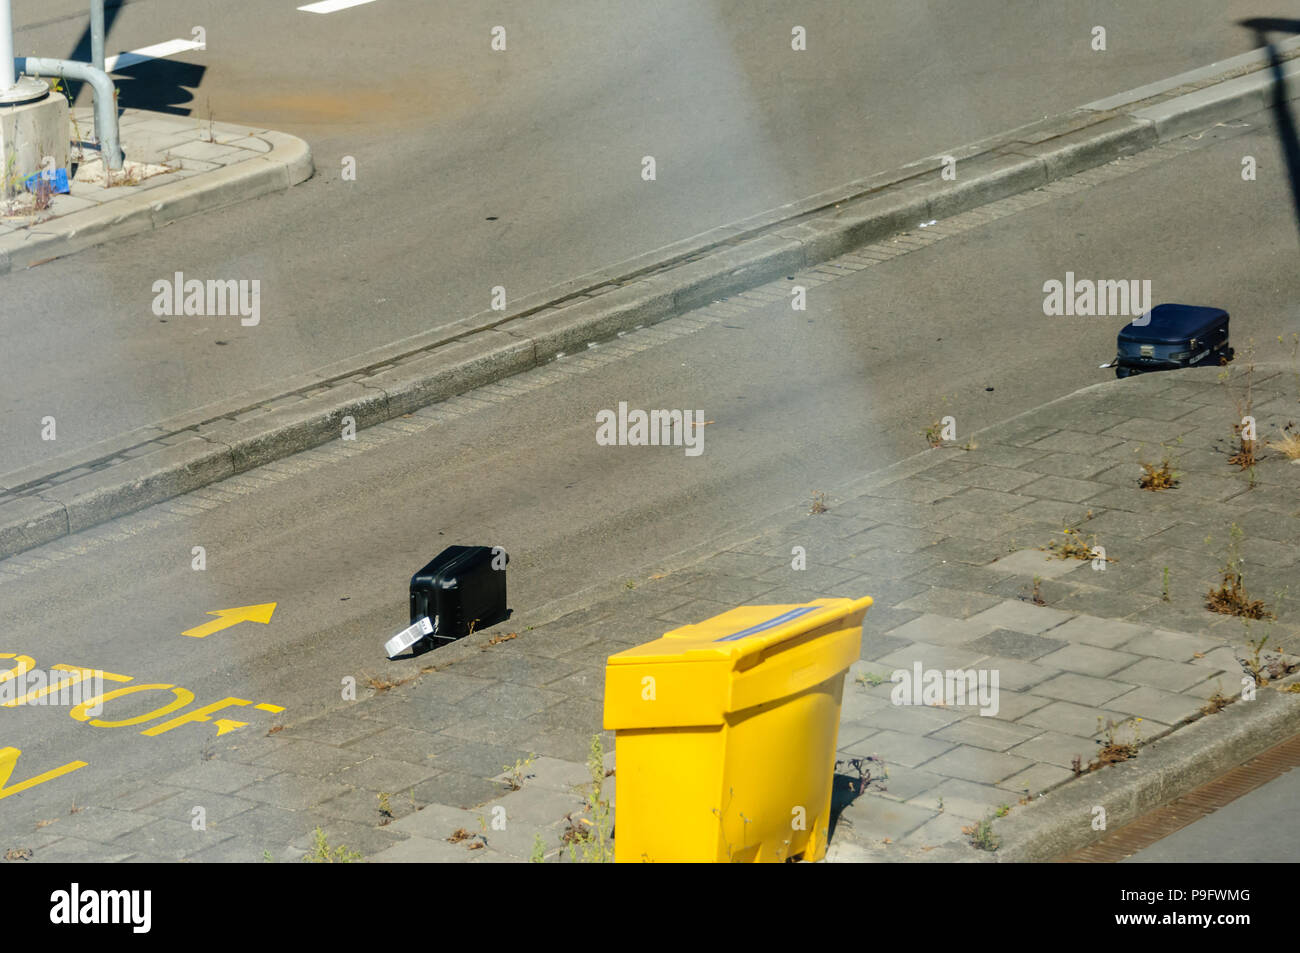 Passenger luggage suitcases lie on an airport road after falling off a baggage truck, will be lost luggage. Stock Photo